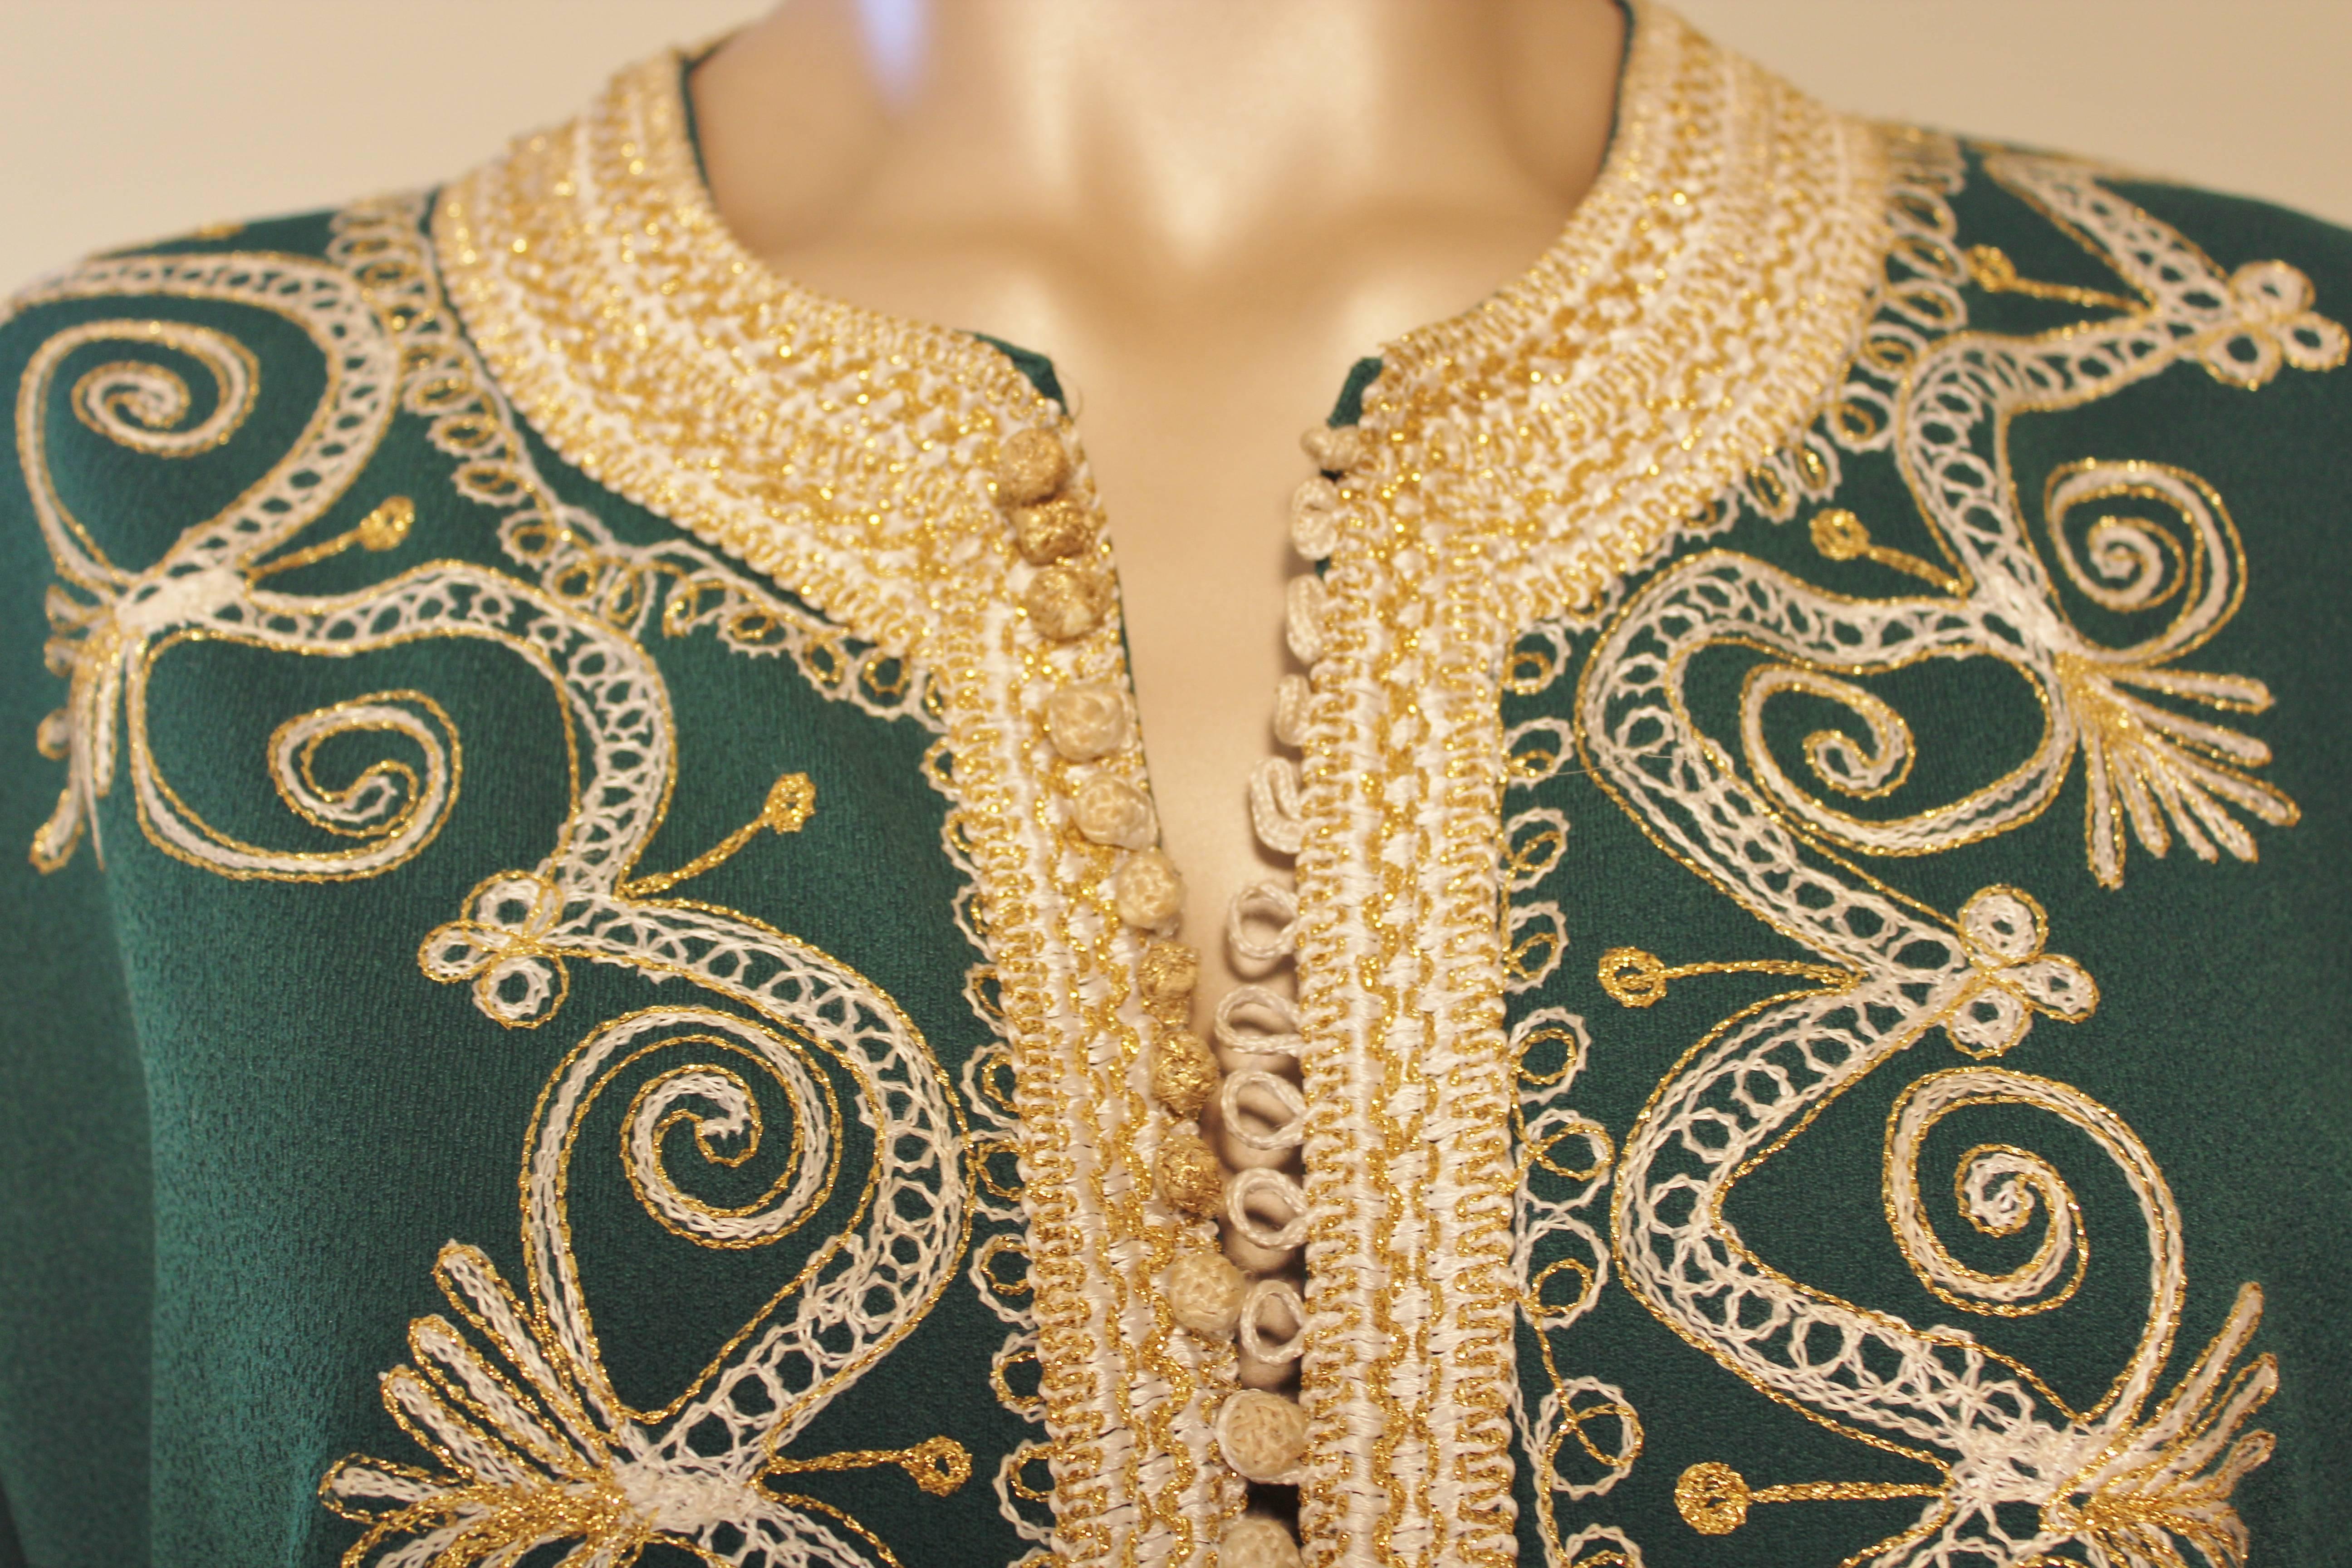 Moroccan Green Embroidered Caftan Maxi Dress Kaftan Size M In Good Condition For Sale In North Hollywood, CA